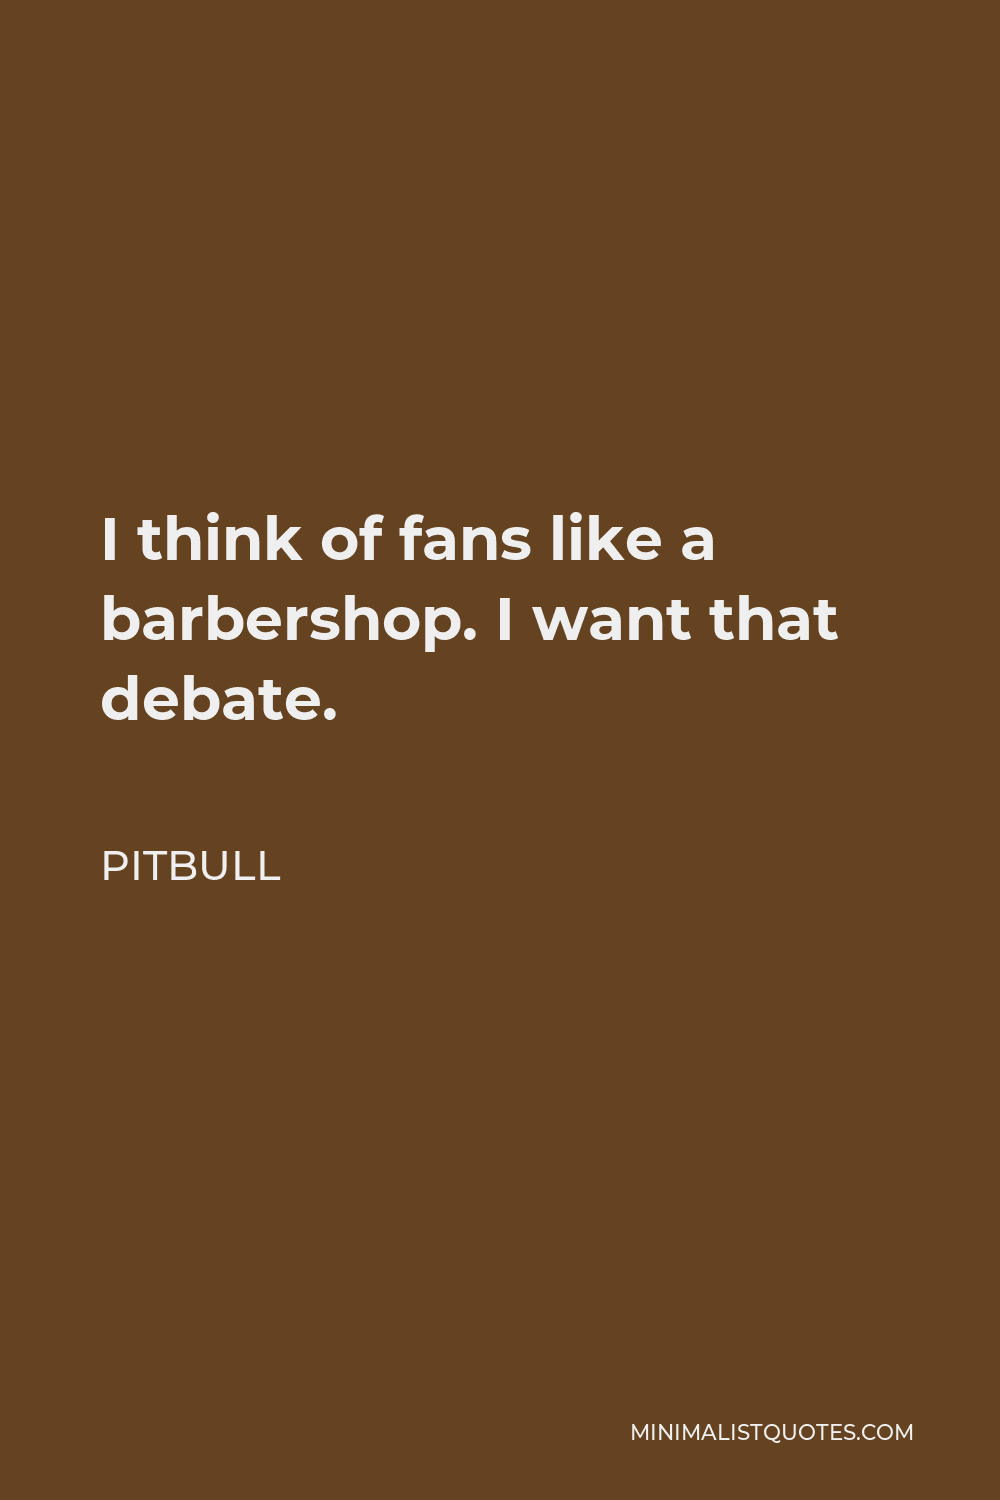 Pitbull Quote - I think of fans like a barbershop. I want that debate.